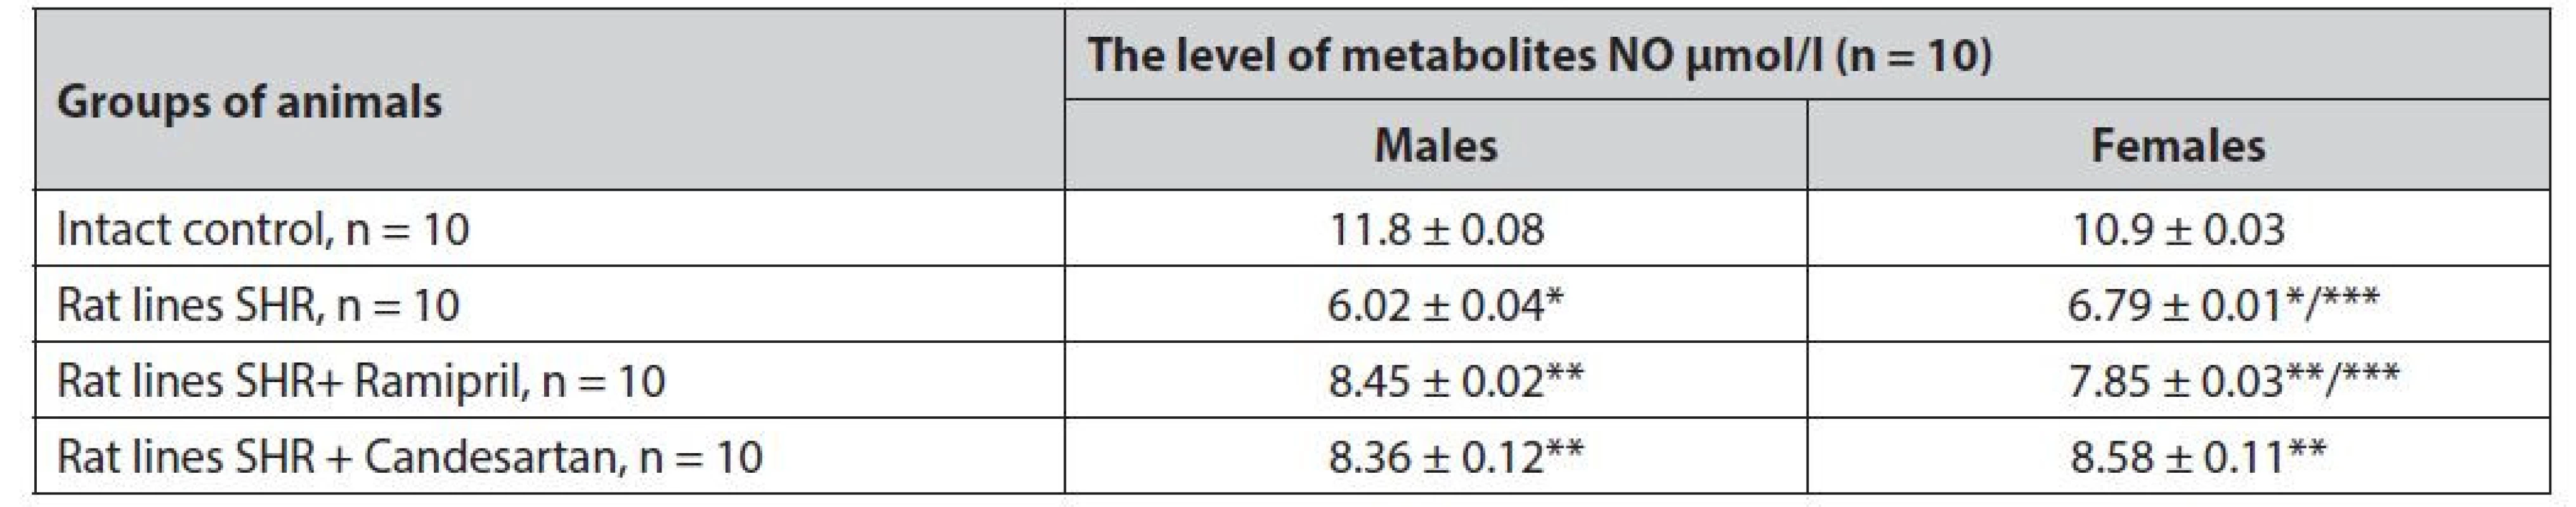 Study of gender differences in the effect of ramipril and candesartan on the level of NO metabolites in SHR rats